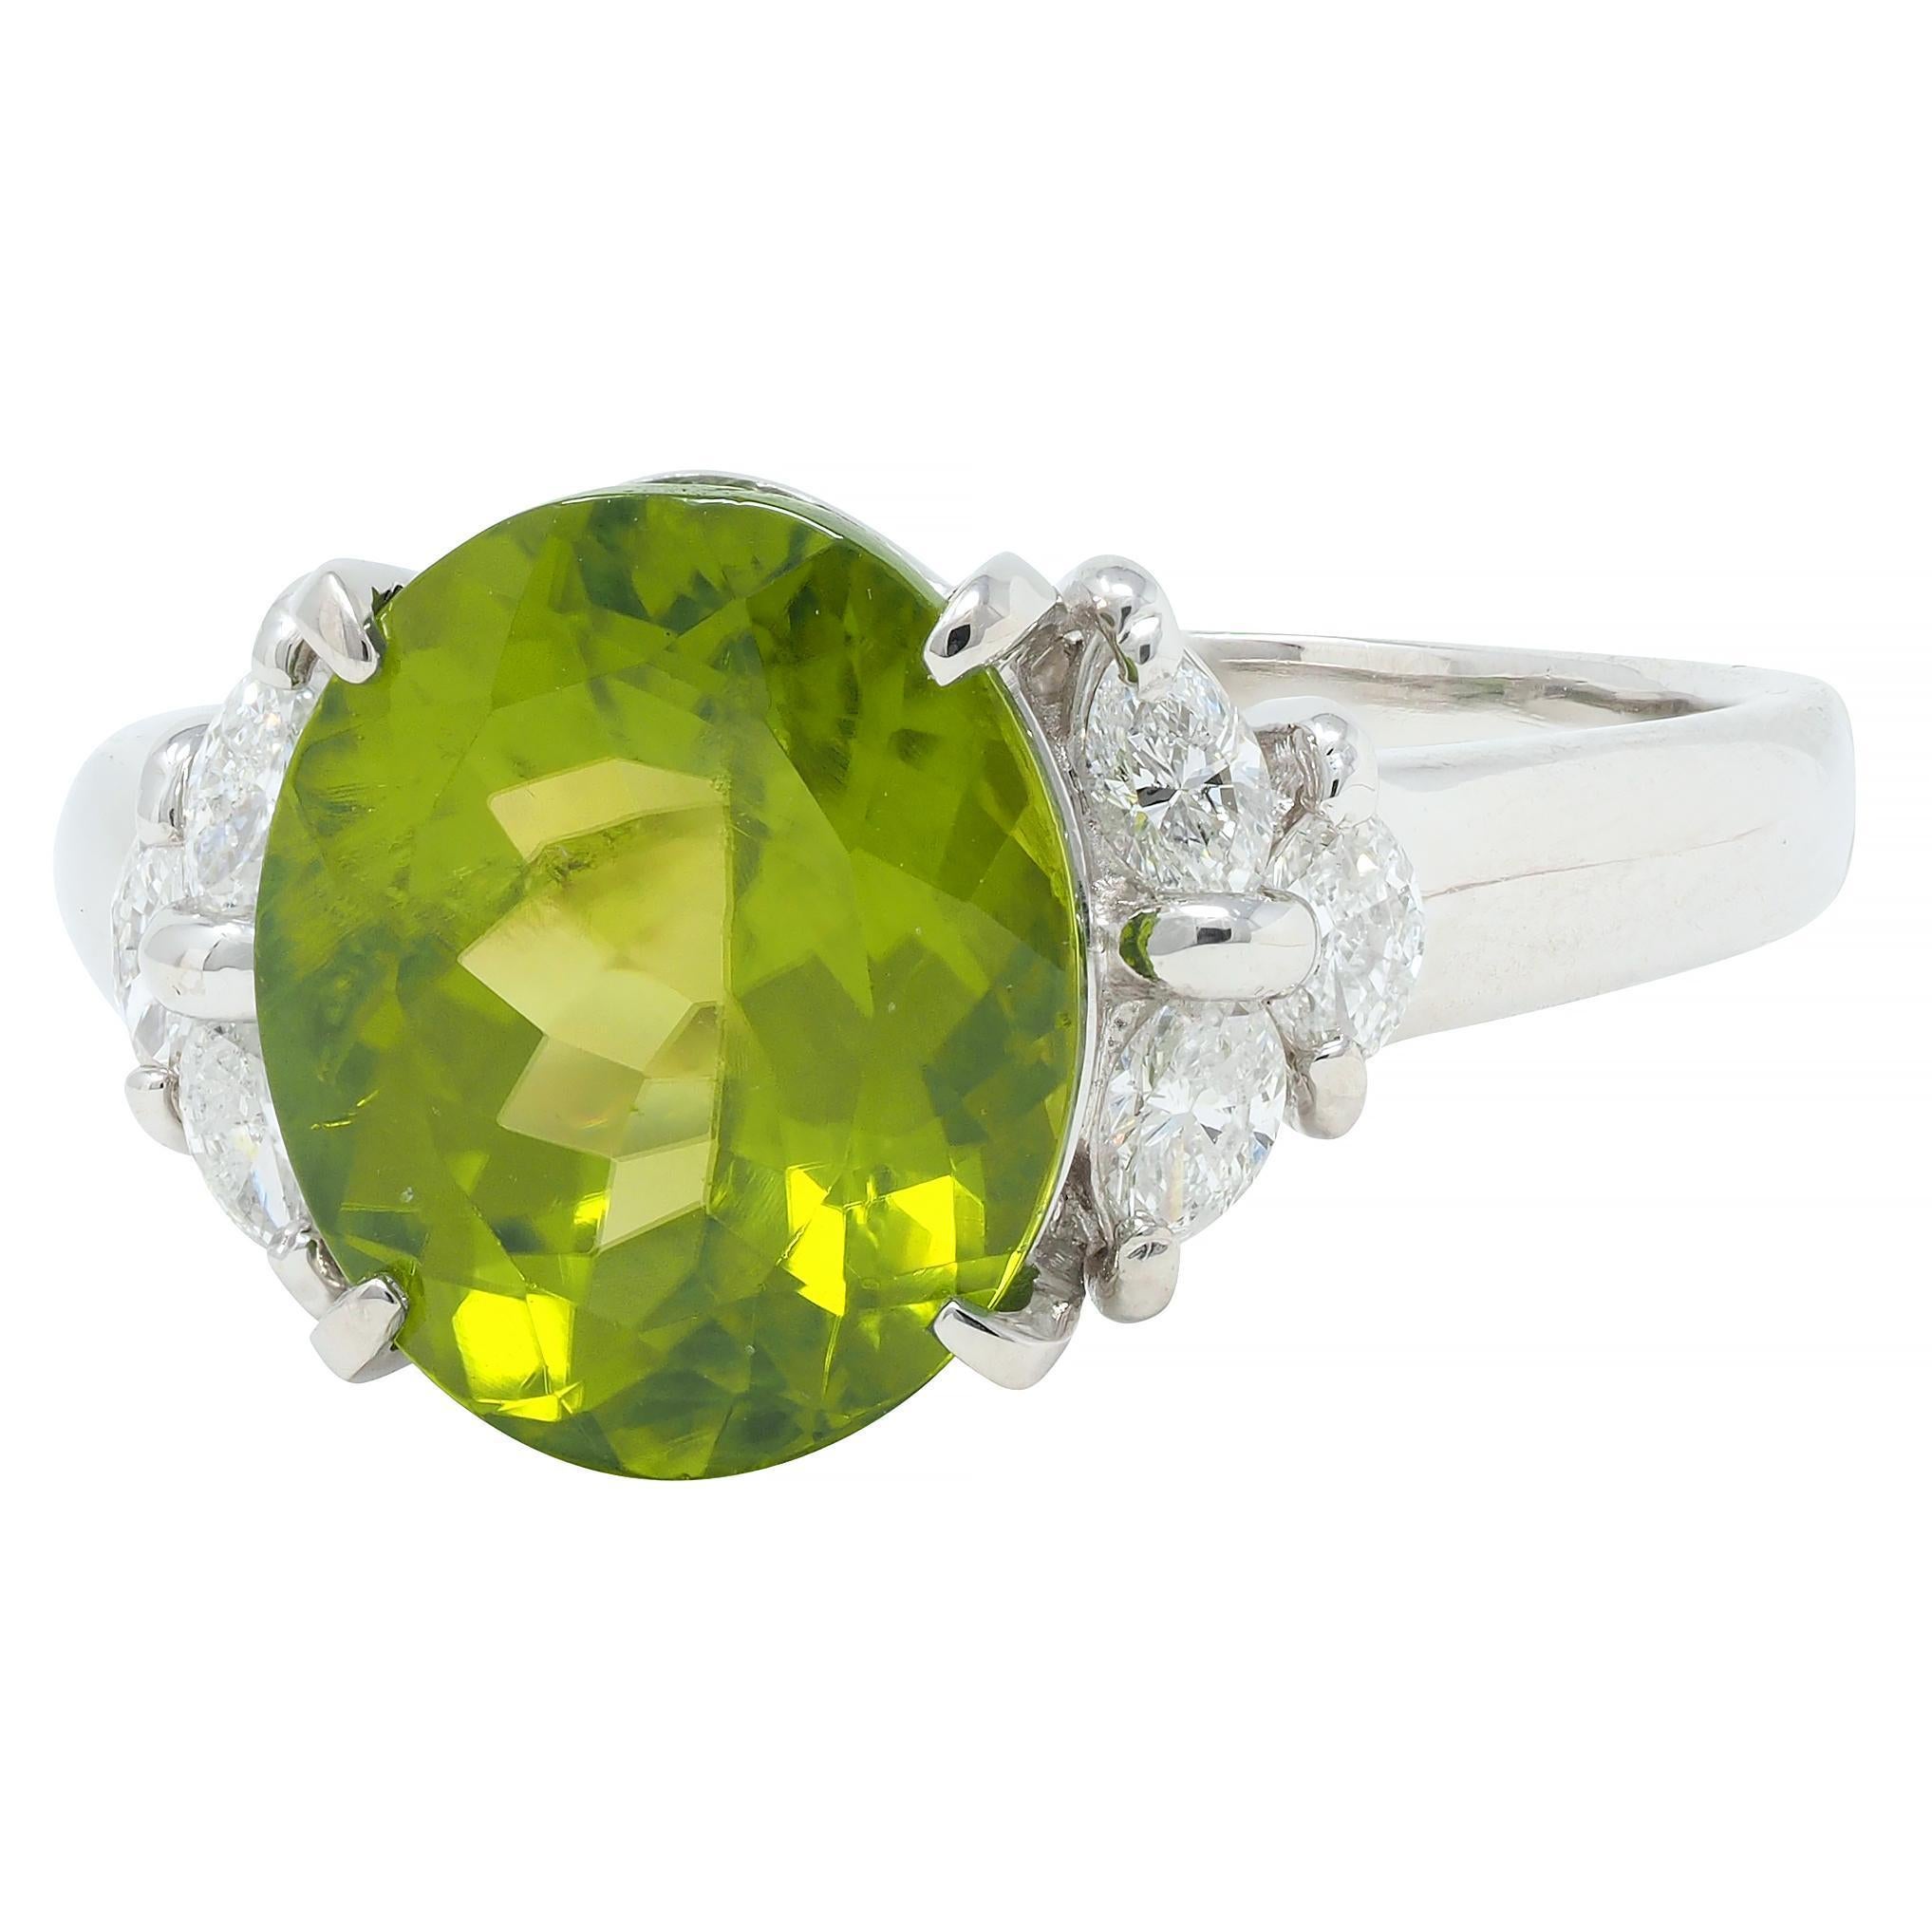 Centering an oval mixed-cut peridot weighing approximately 5.46 carats - transparent medium yellow green
Prong set in a pierced basket and flanked by cathedral shoulders
Prong set with clustered marquise cut diamonds
Weighing approximately 0.45